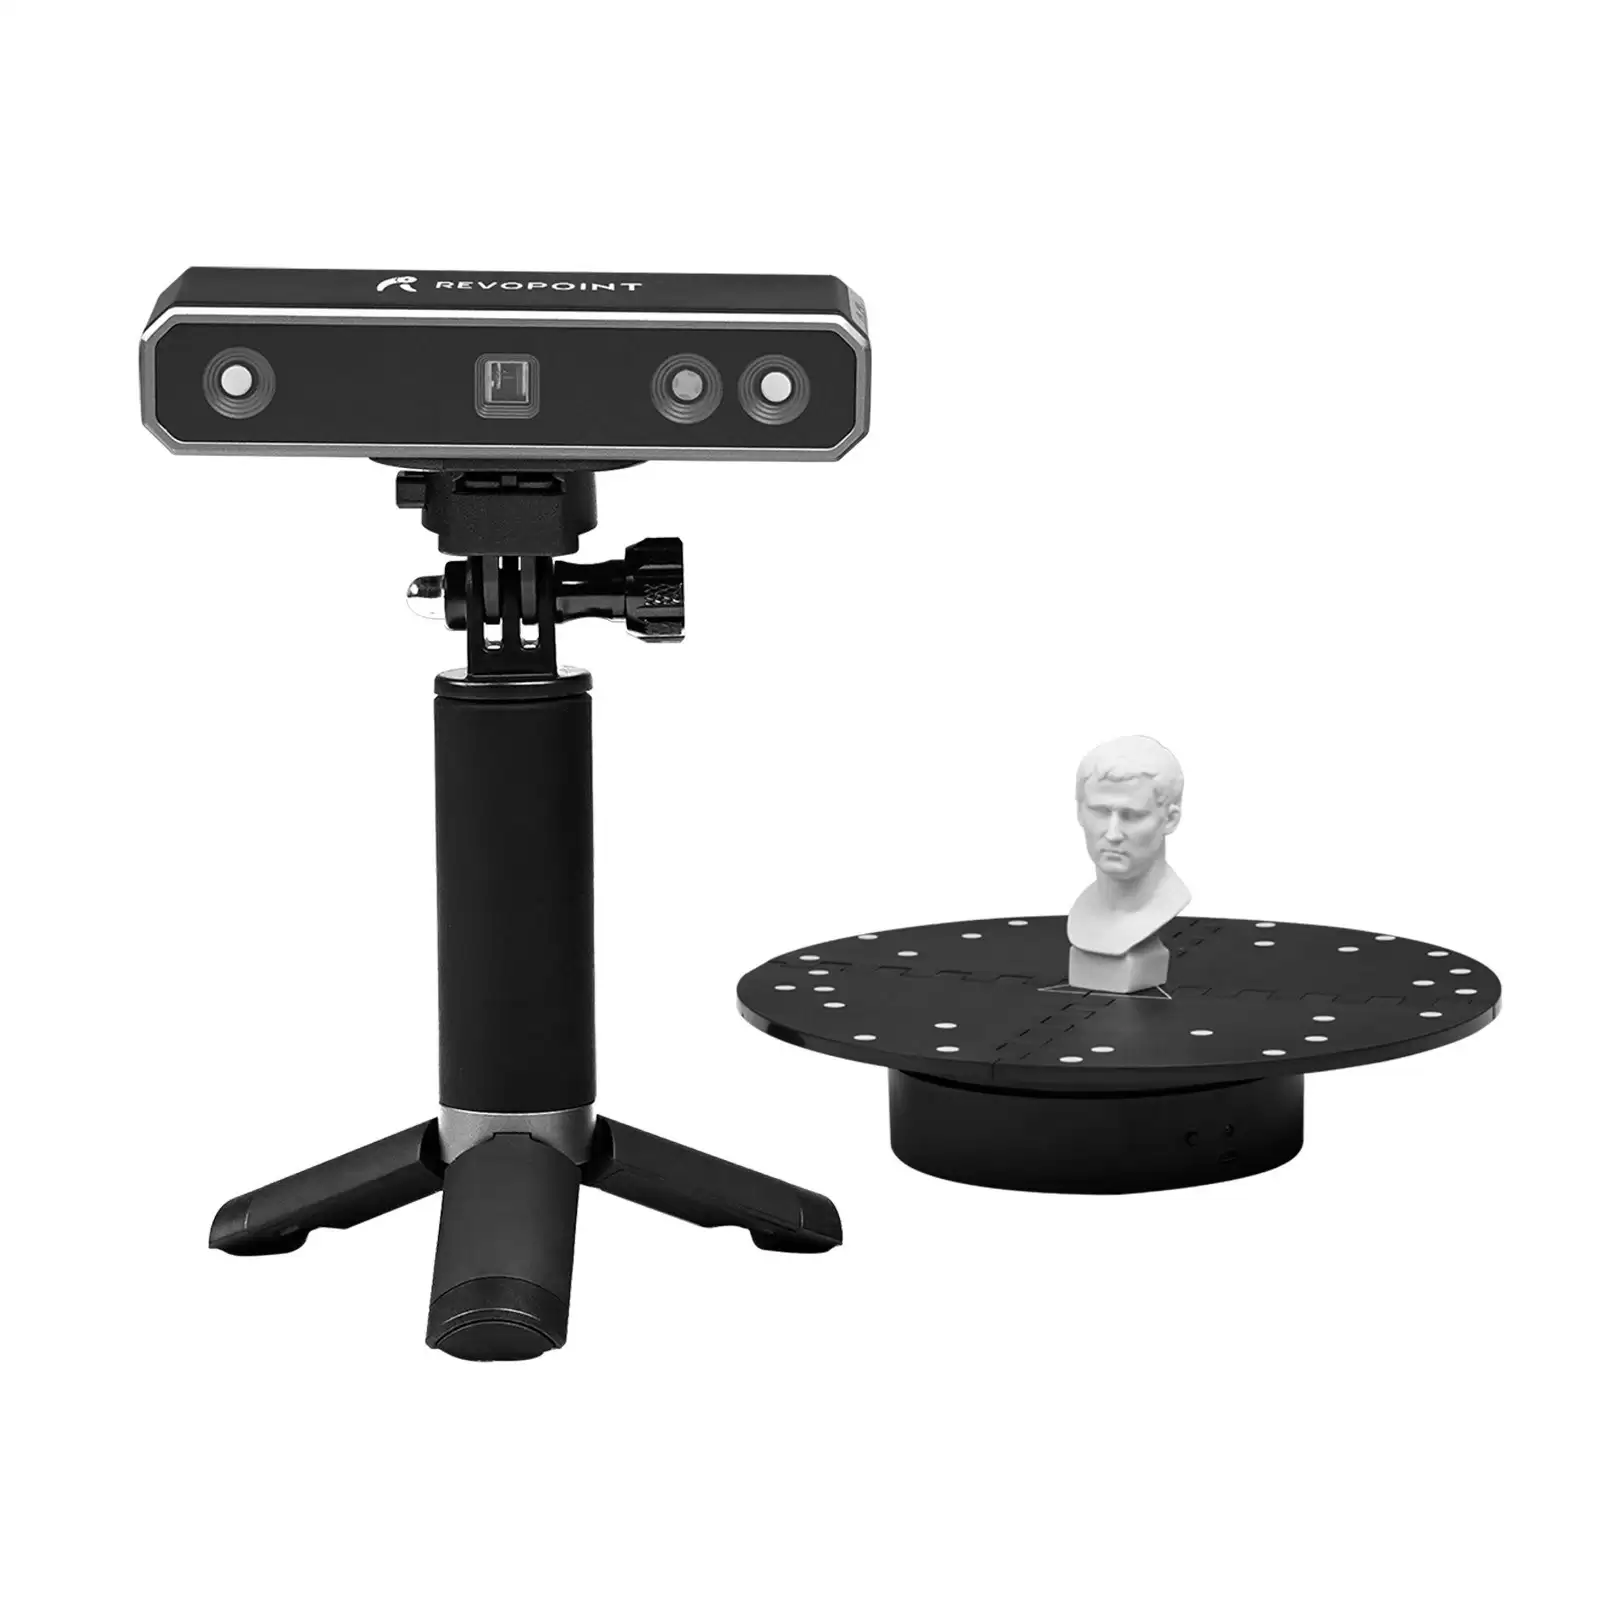 Order In Just $724.47 Revopoint Mini 3d Scanner Set Hanheld Turnable Scan Mode Standard Version With This Tomtop Discount Voucher